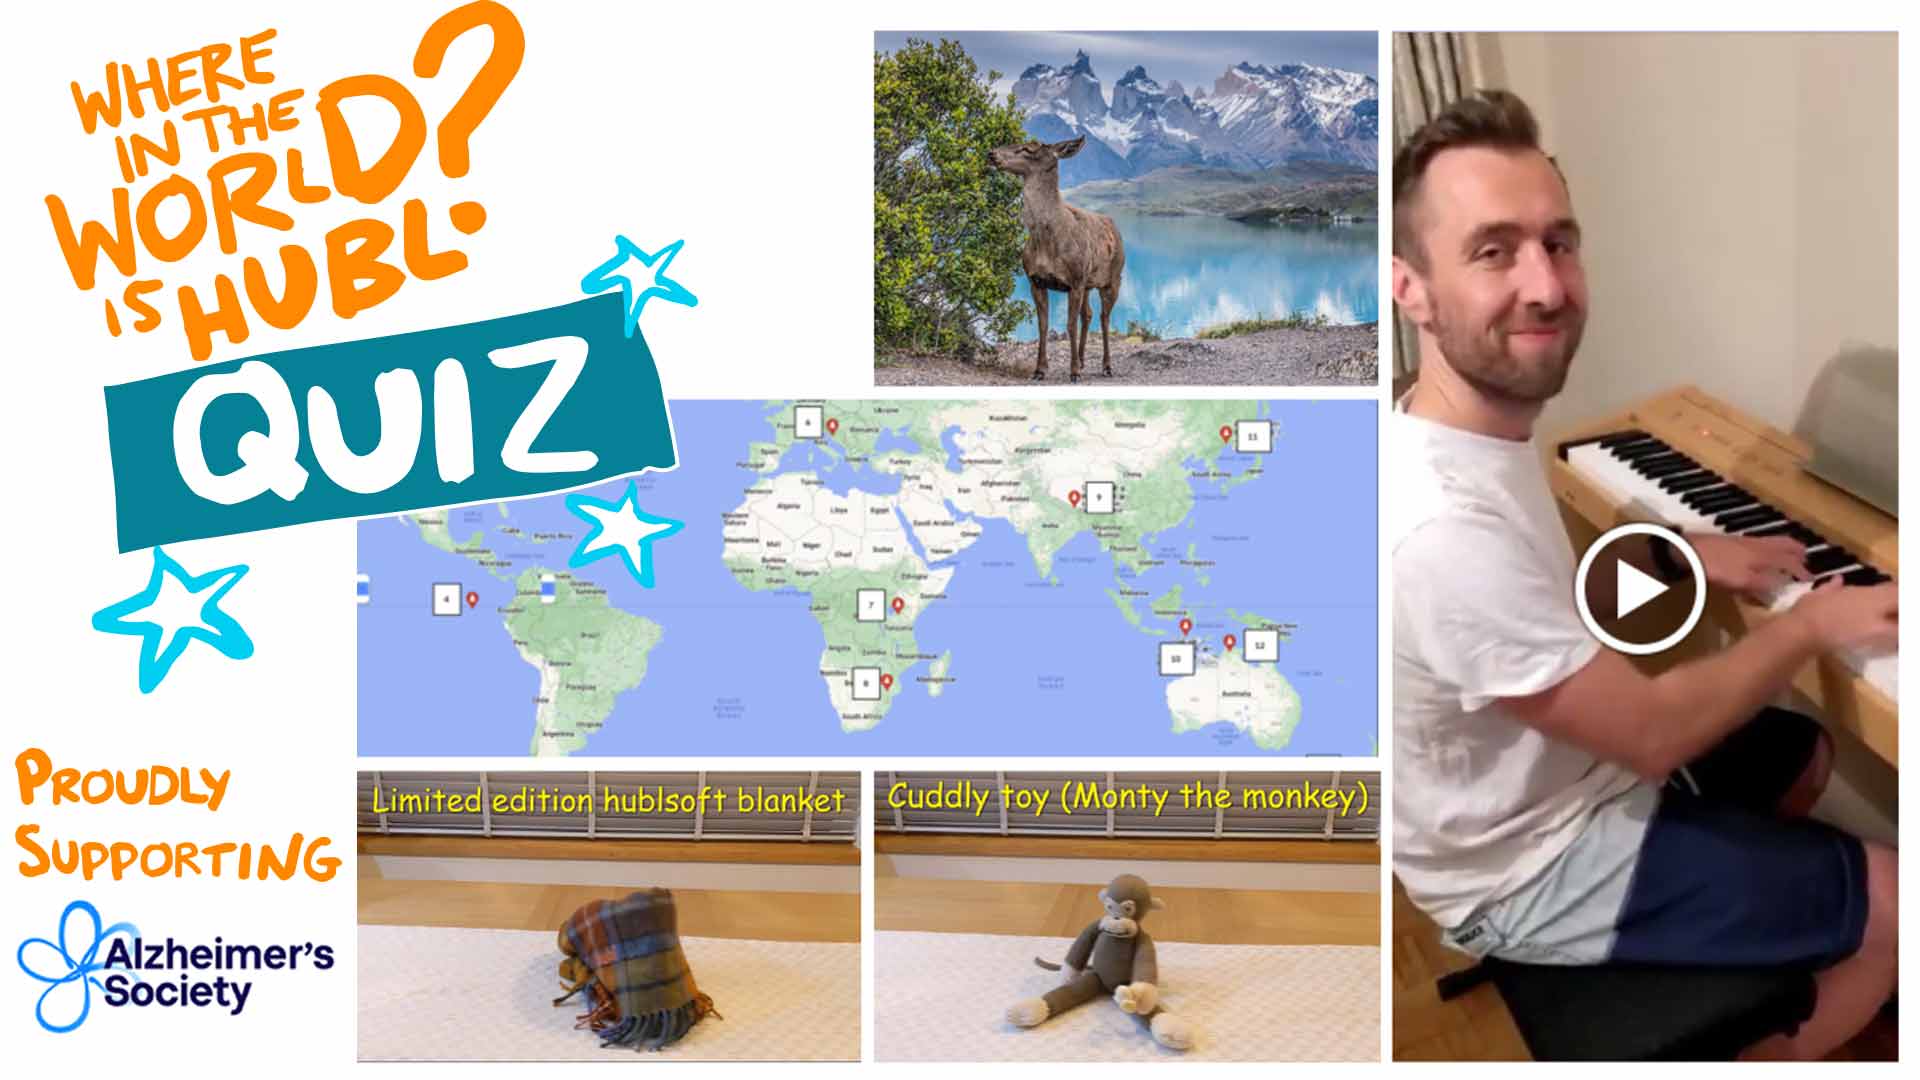 Where in the world is Hubl Team Quiz - Montage of images